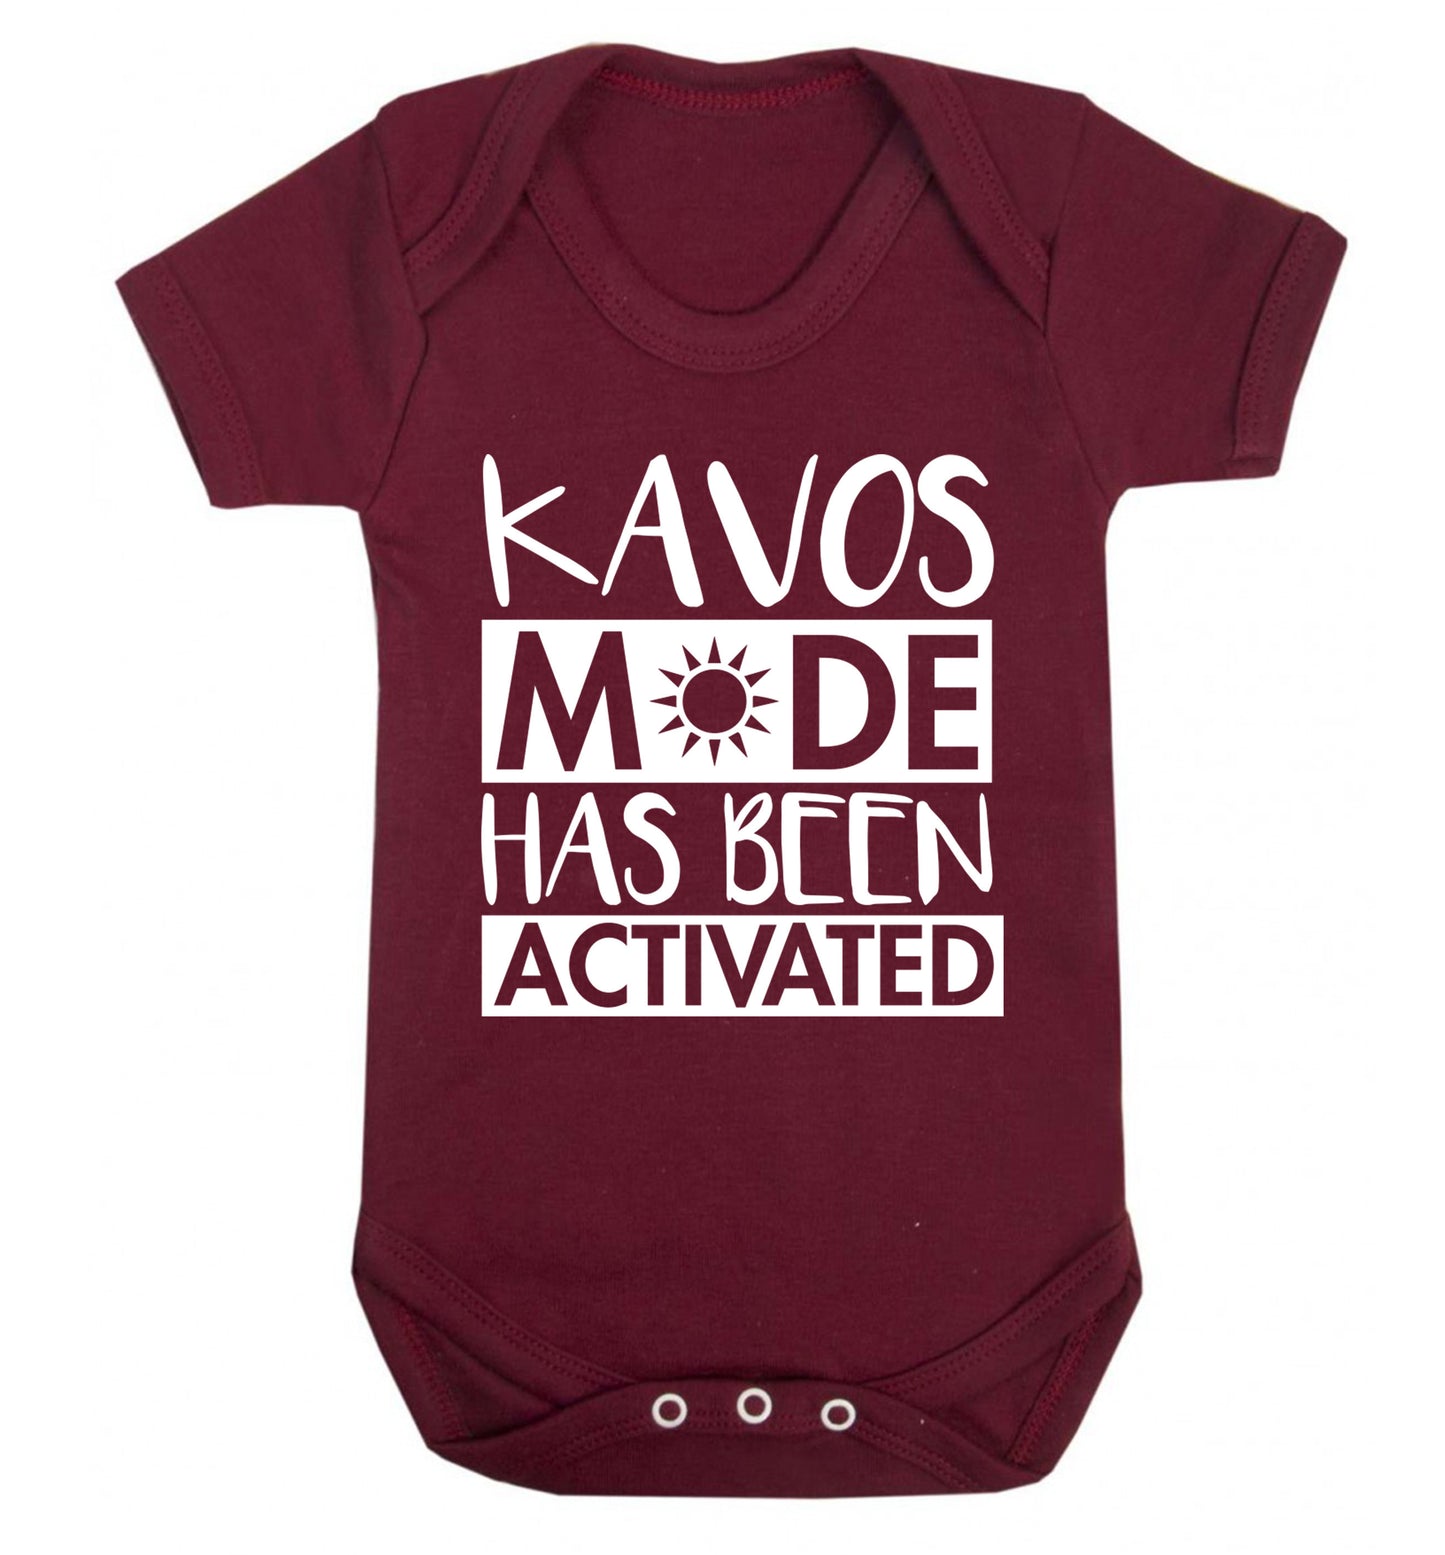 Kavos mode has been activated Baby Vest maroon 18-24 months